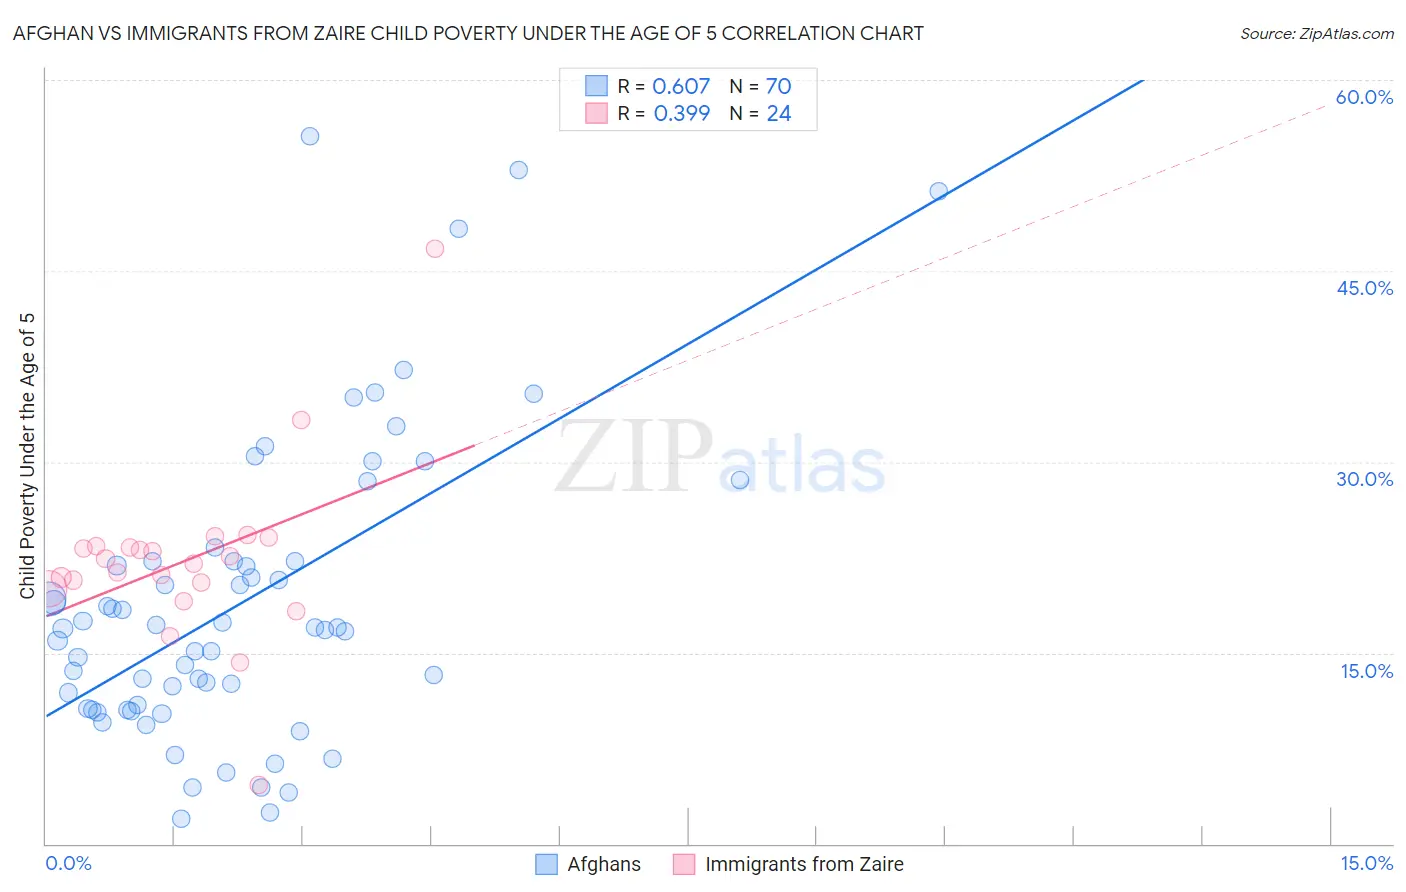 Afghan vs Immigrants from Zaire Child Poverty Under the Age of 5